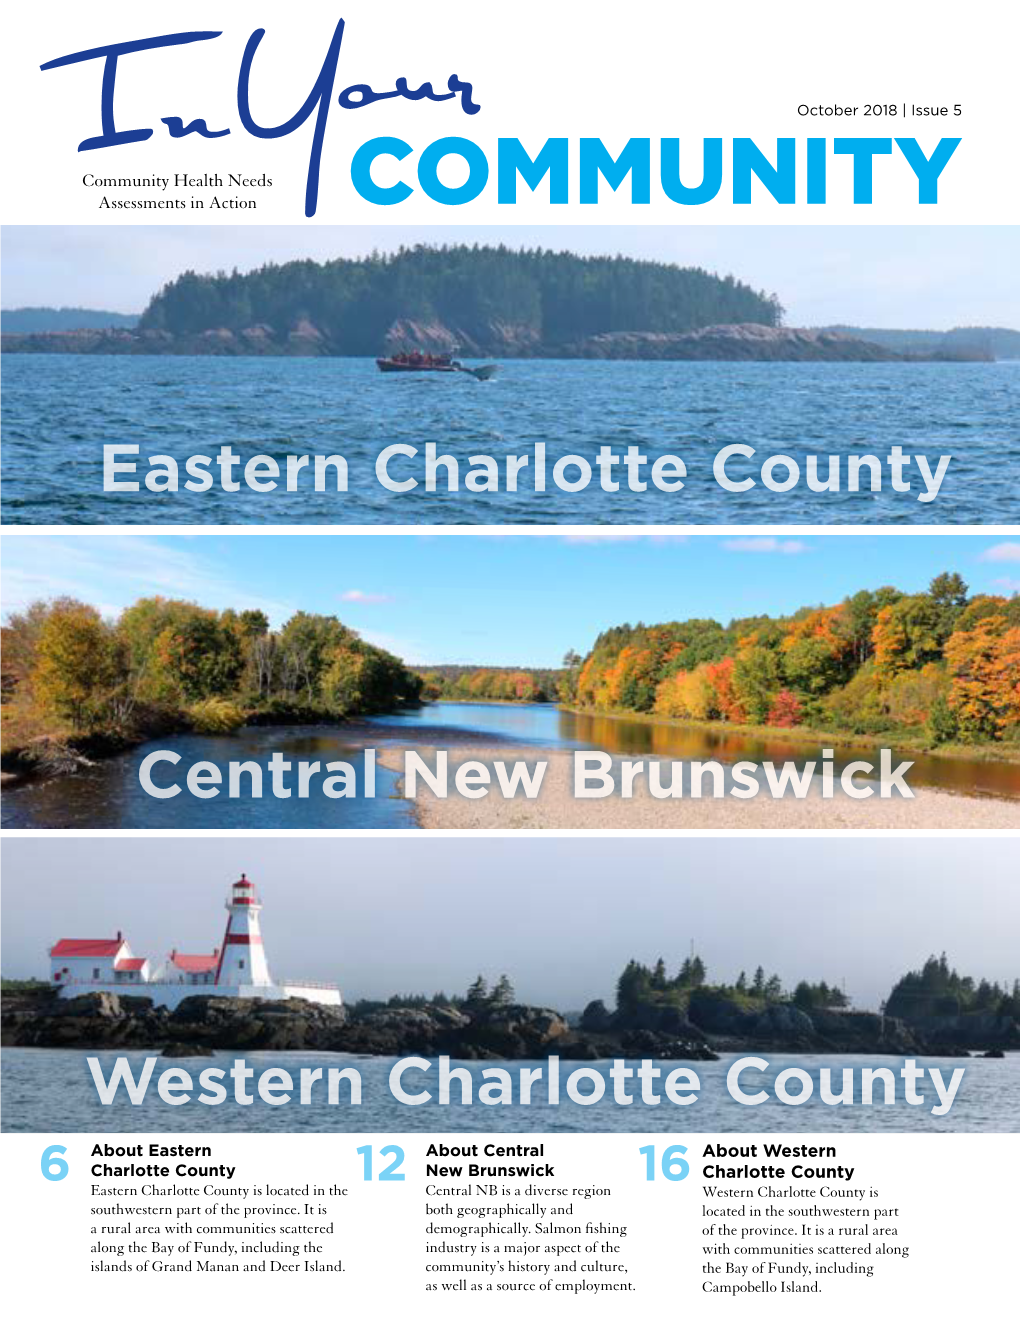 In Your Community, We Are Highlighting the Work Being Done in Eastern Charlotte County, Western Charlotte County and Central New Network Is Brunswick